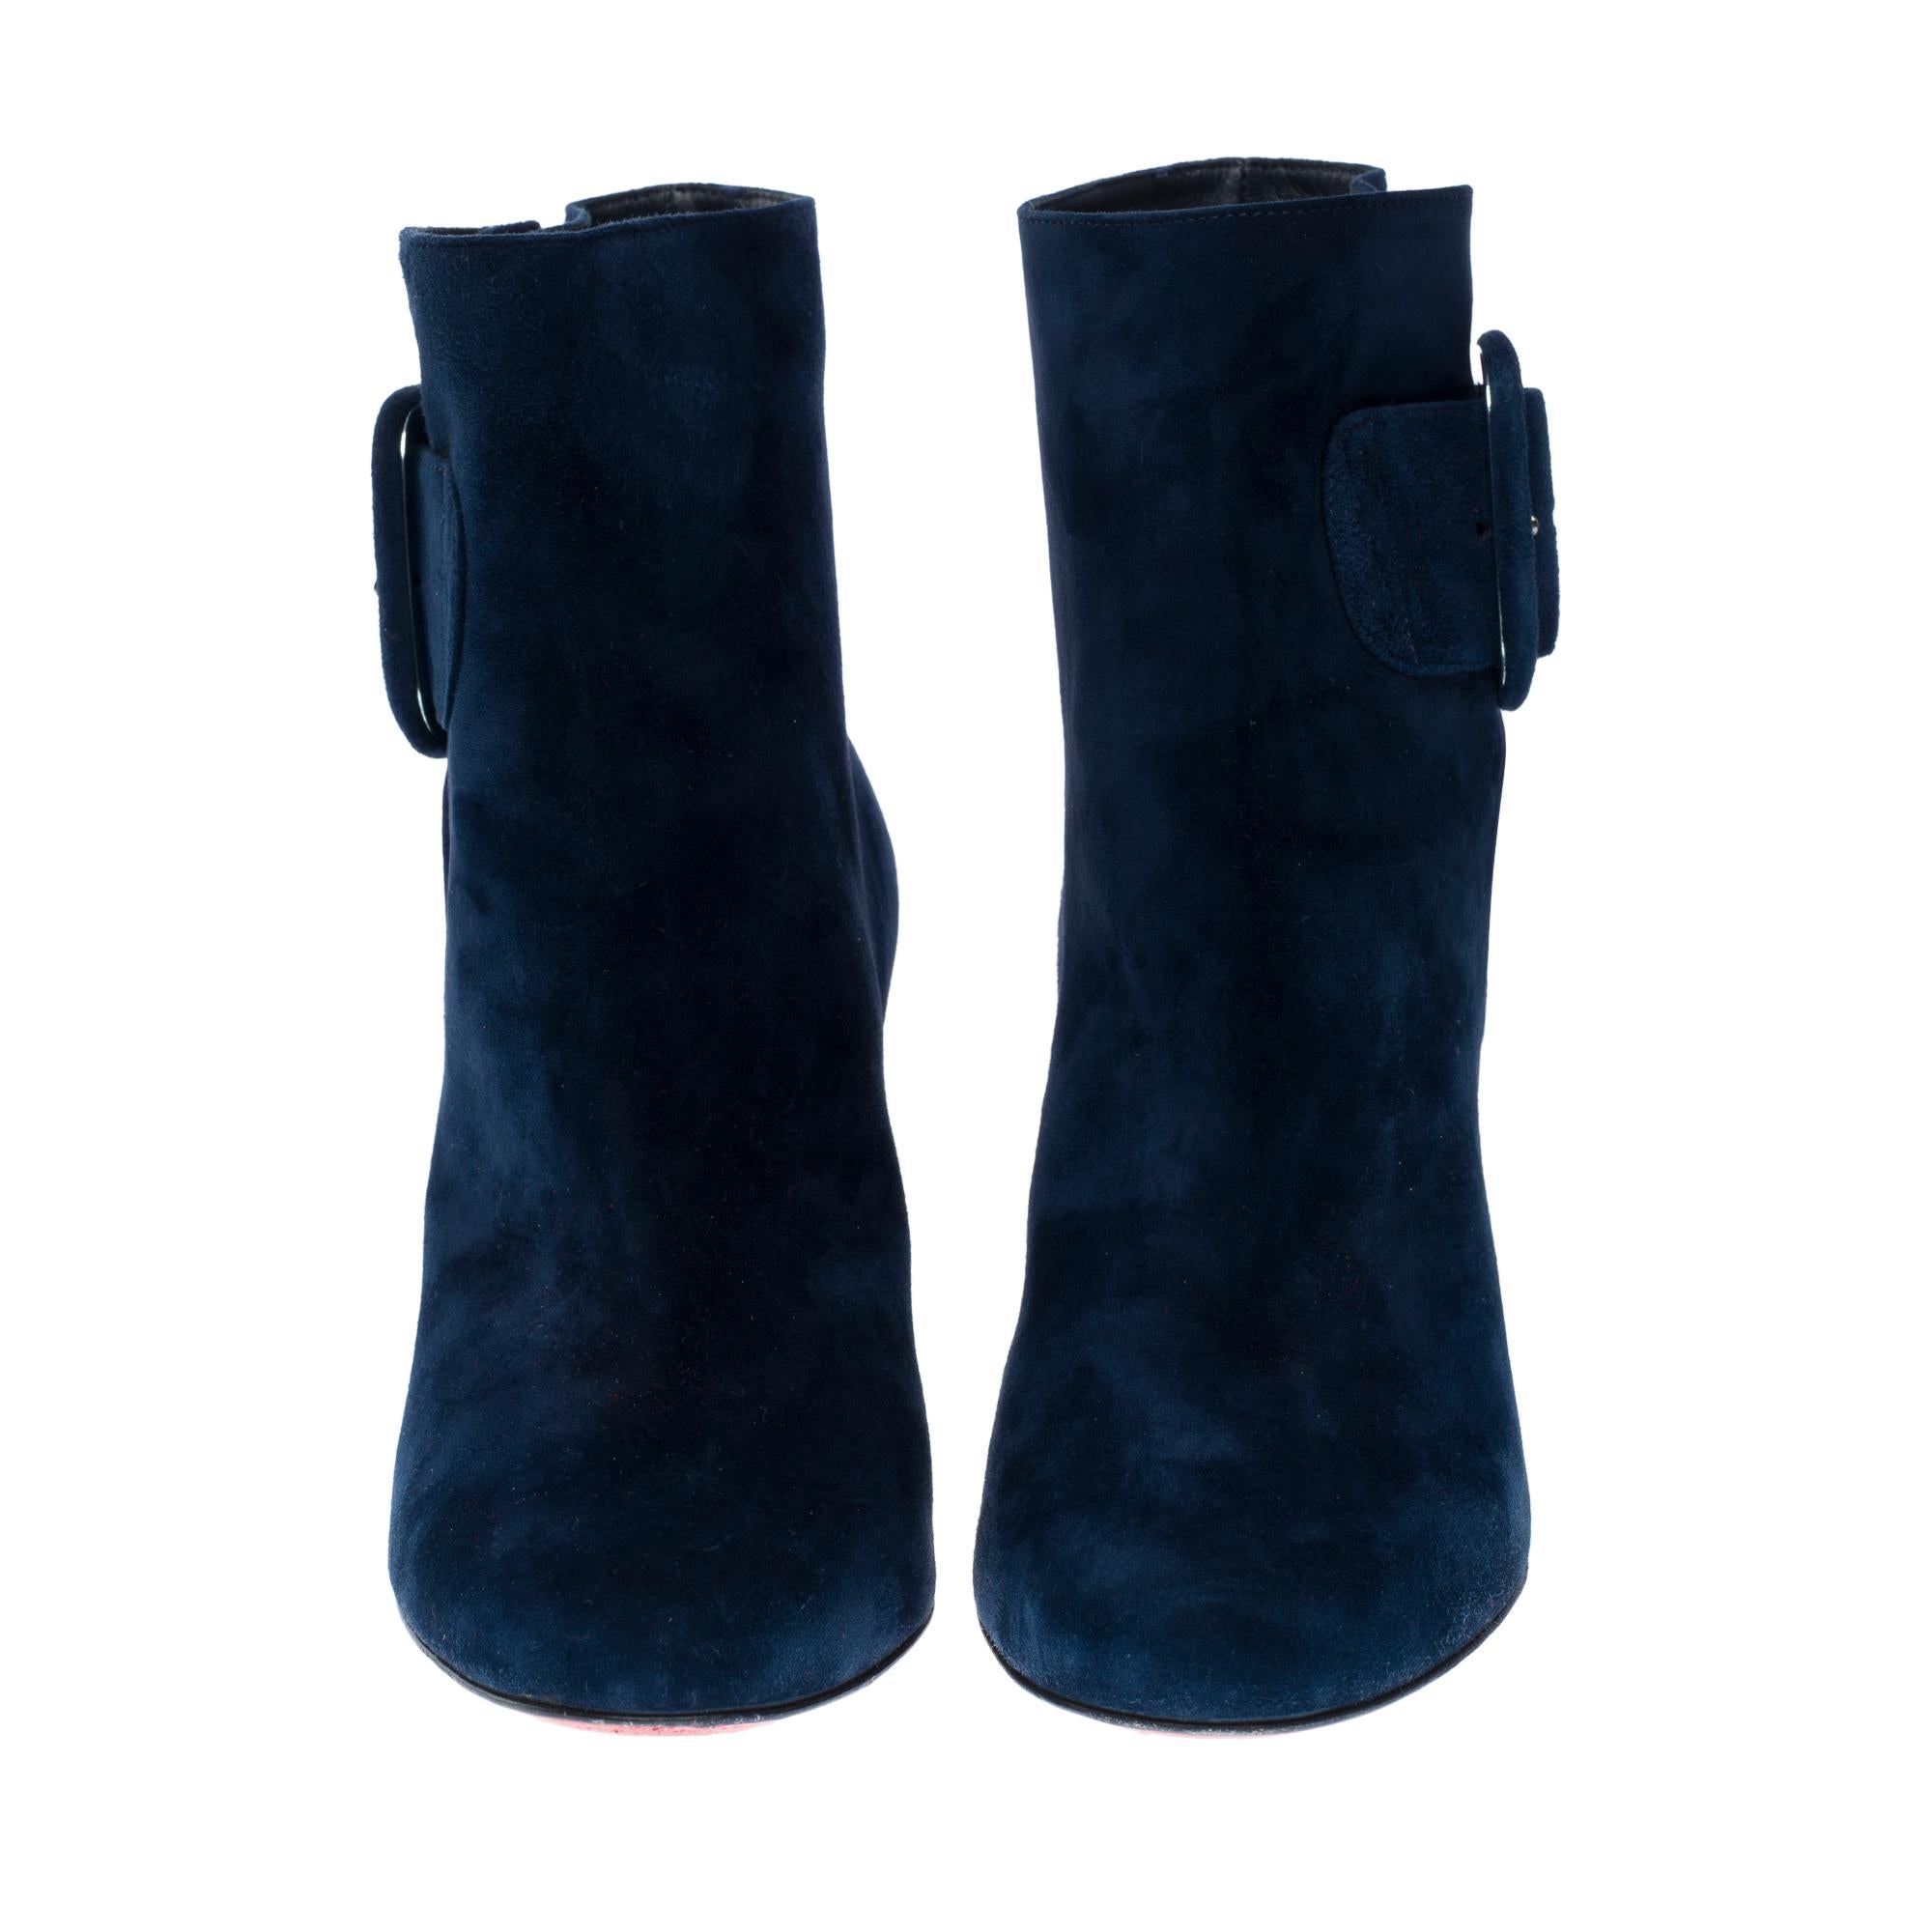 Christian Louboutin ankleboot in blue suede, size 37 In Good Condition For Sale In Paris, IDF